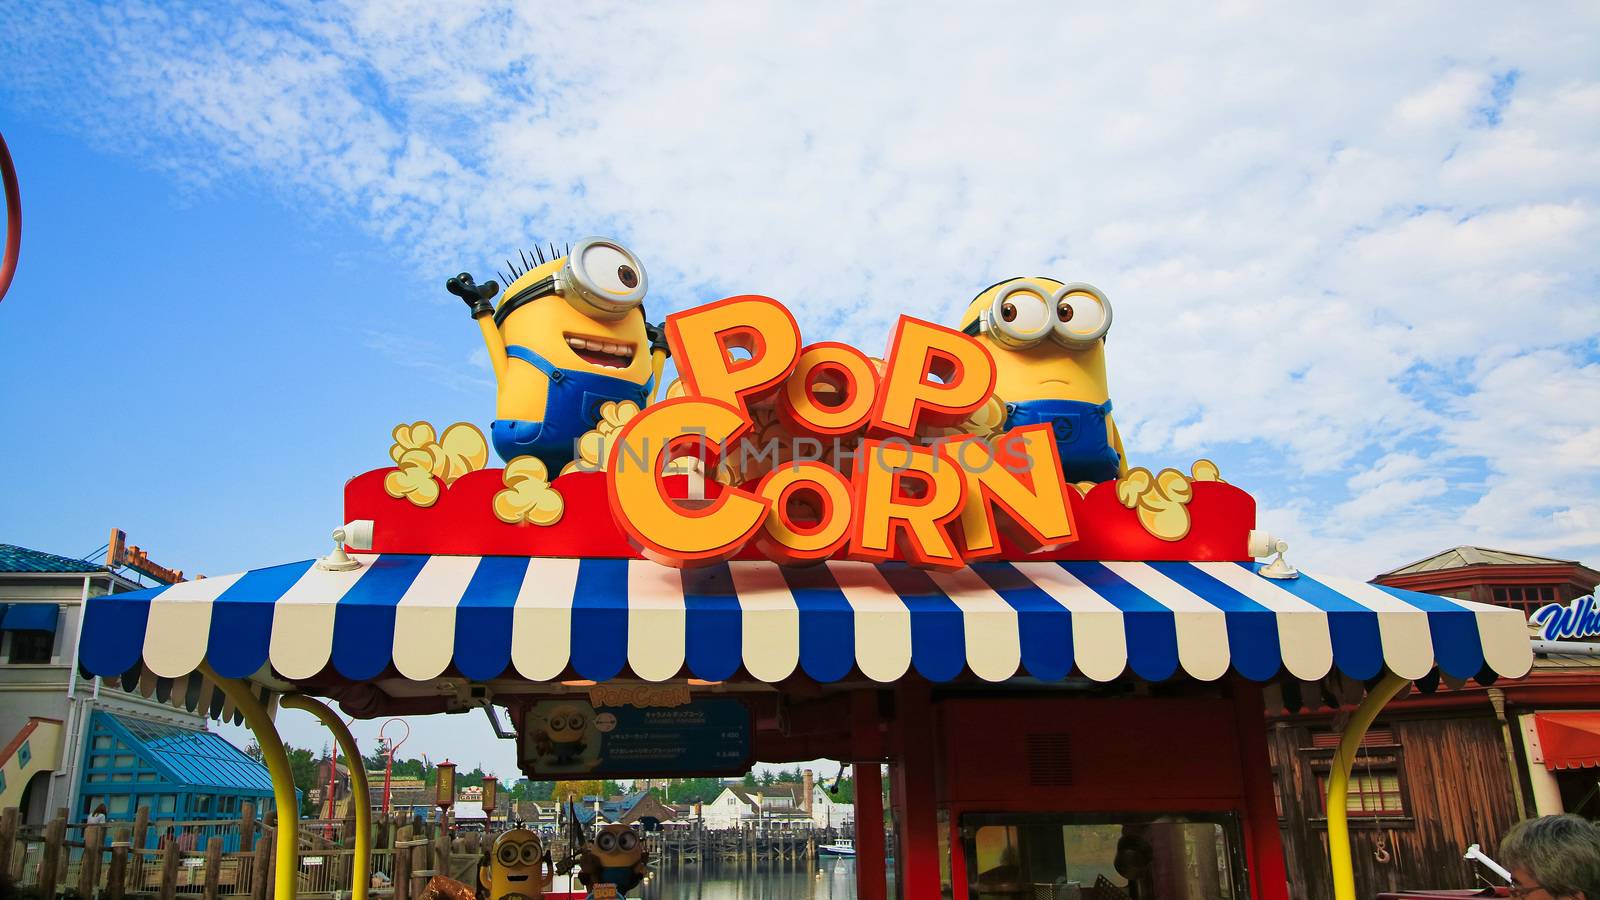 OSAKA, JAPAN - JAN 07, 2017 : Photo of "HAPPY MINION POP CORN SHOP", selling Minion Pop Corn, located in Universal Studios, Osaka, Japan. Minions are famous character from Despicable Me animation. by USA-TARO